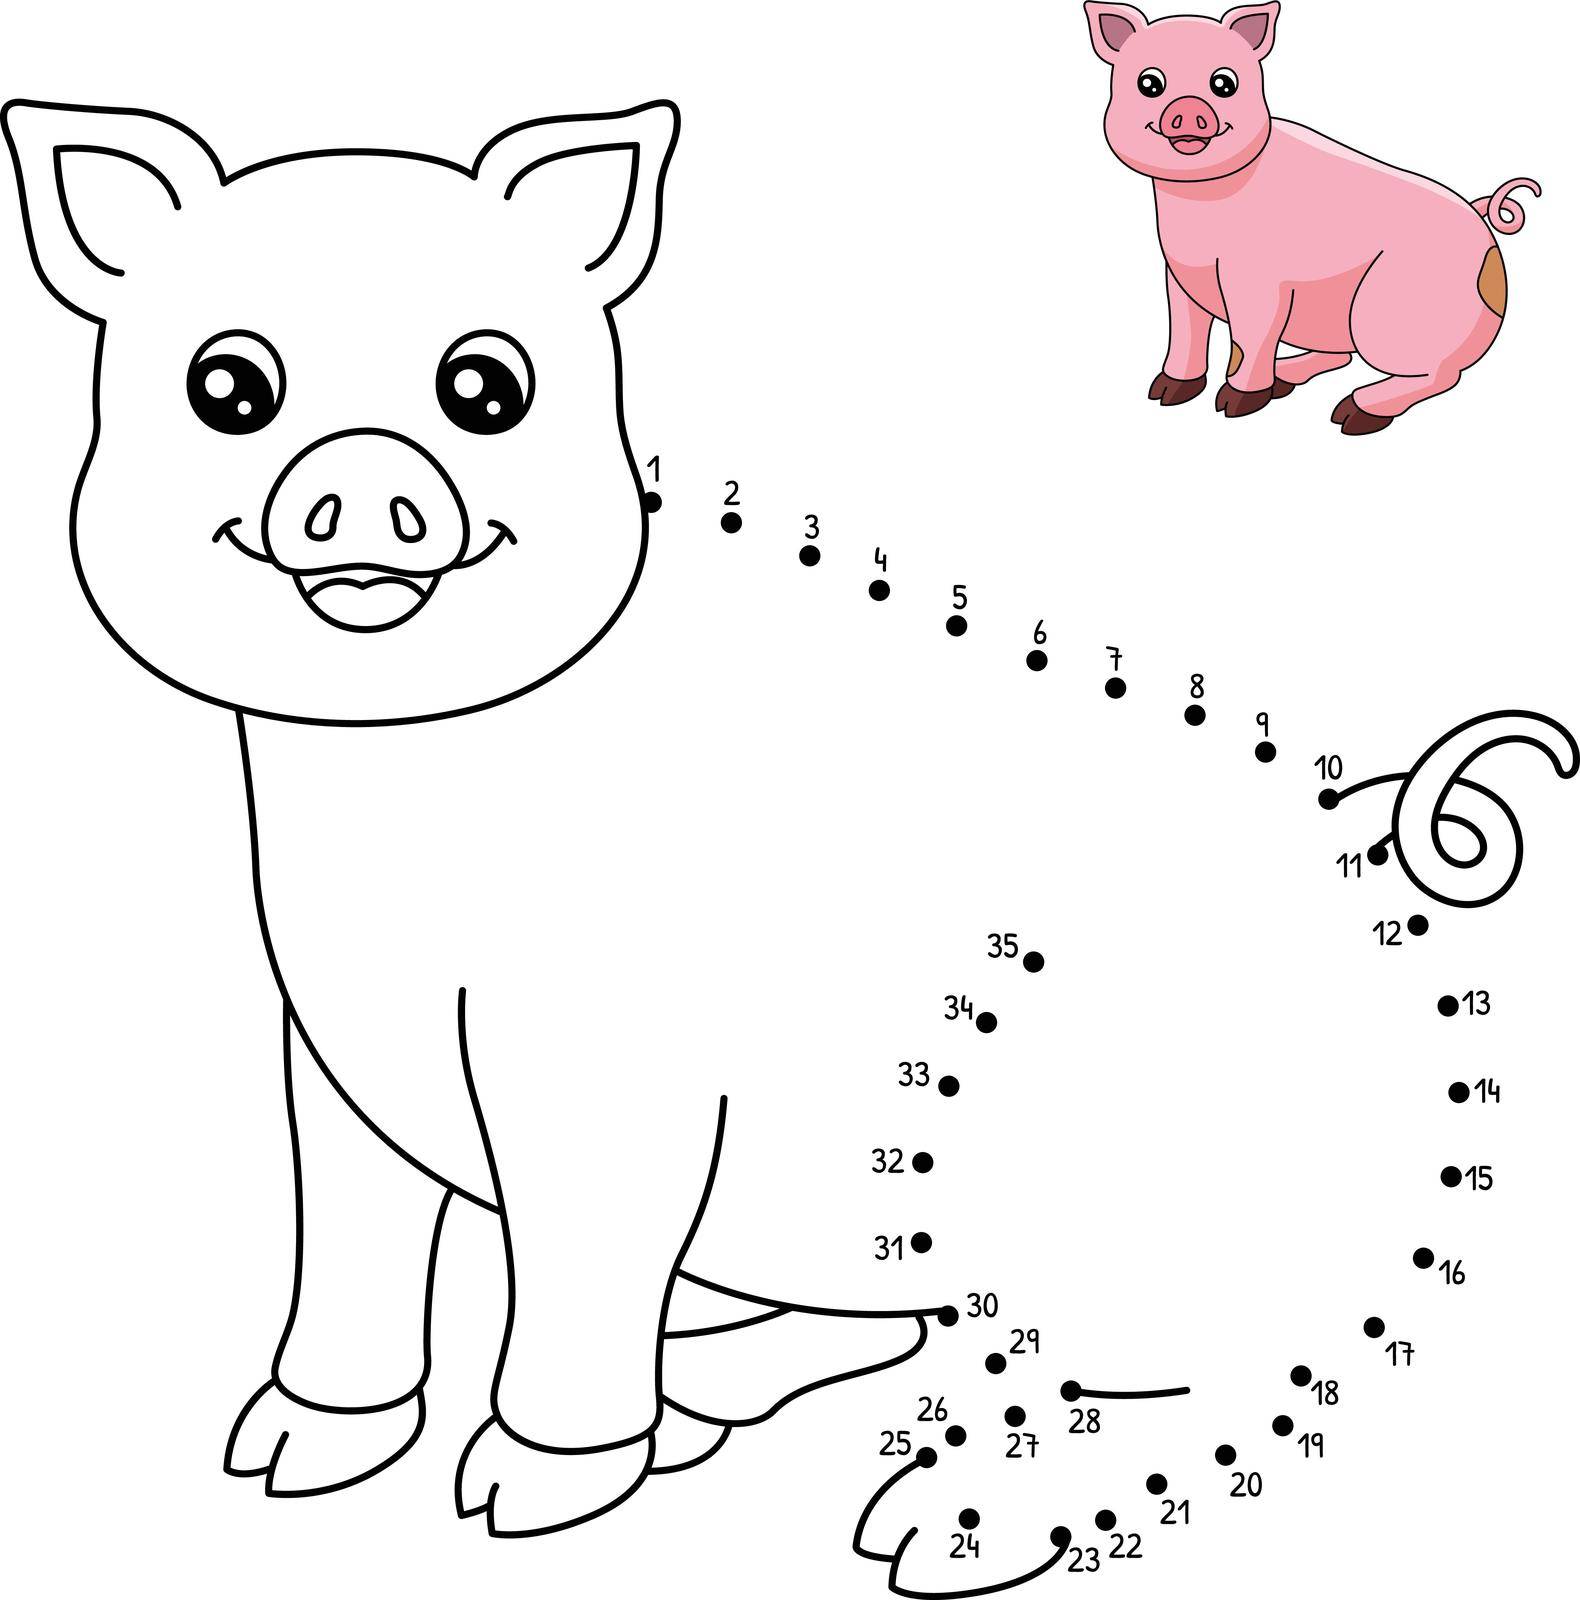 A cute and funny connect-the-dots coloring page of a Pig. Provides hours of coloring fun for children. Color, this page is very easy. Suitable for little kids and toddlers.